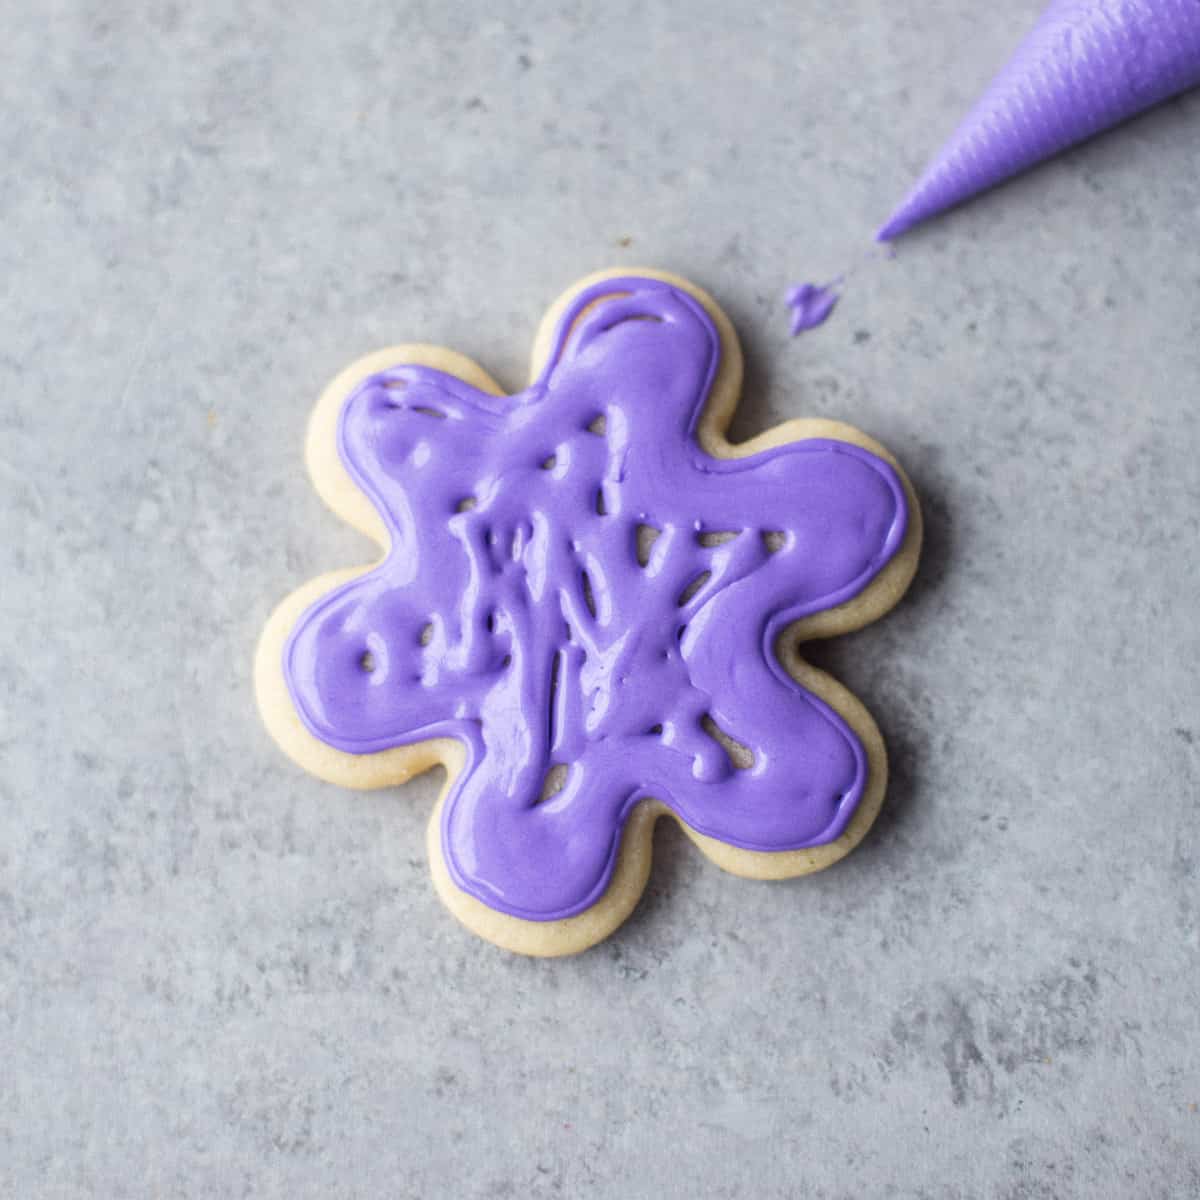 adding purple icing to a sugar cookie